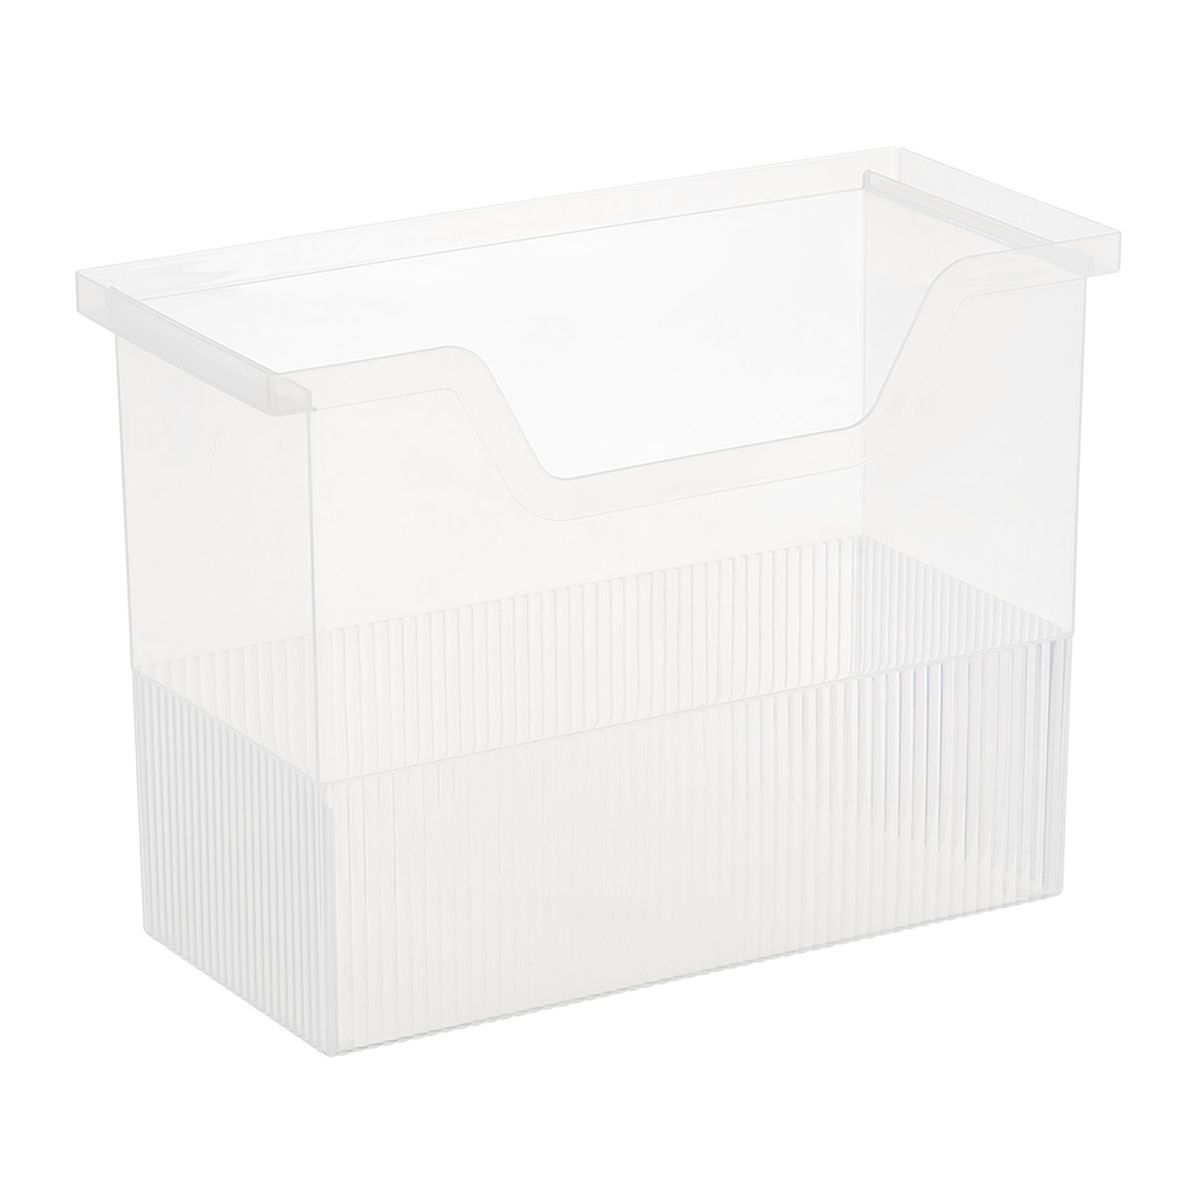 Small Open-Top File Box Translucent | The Container Store